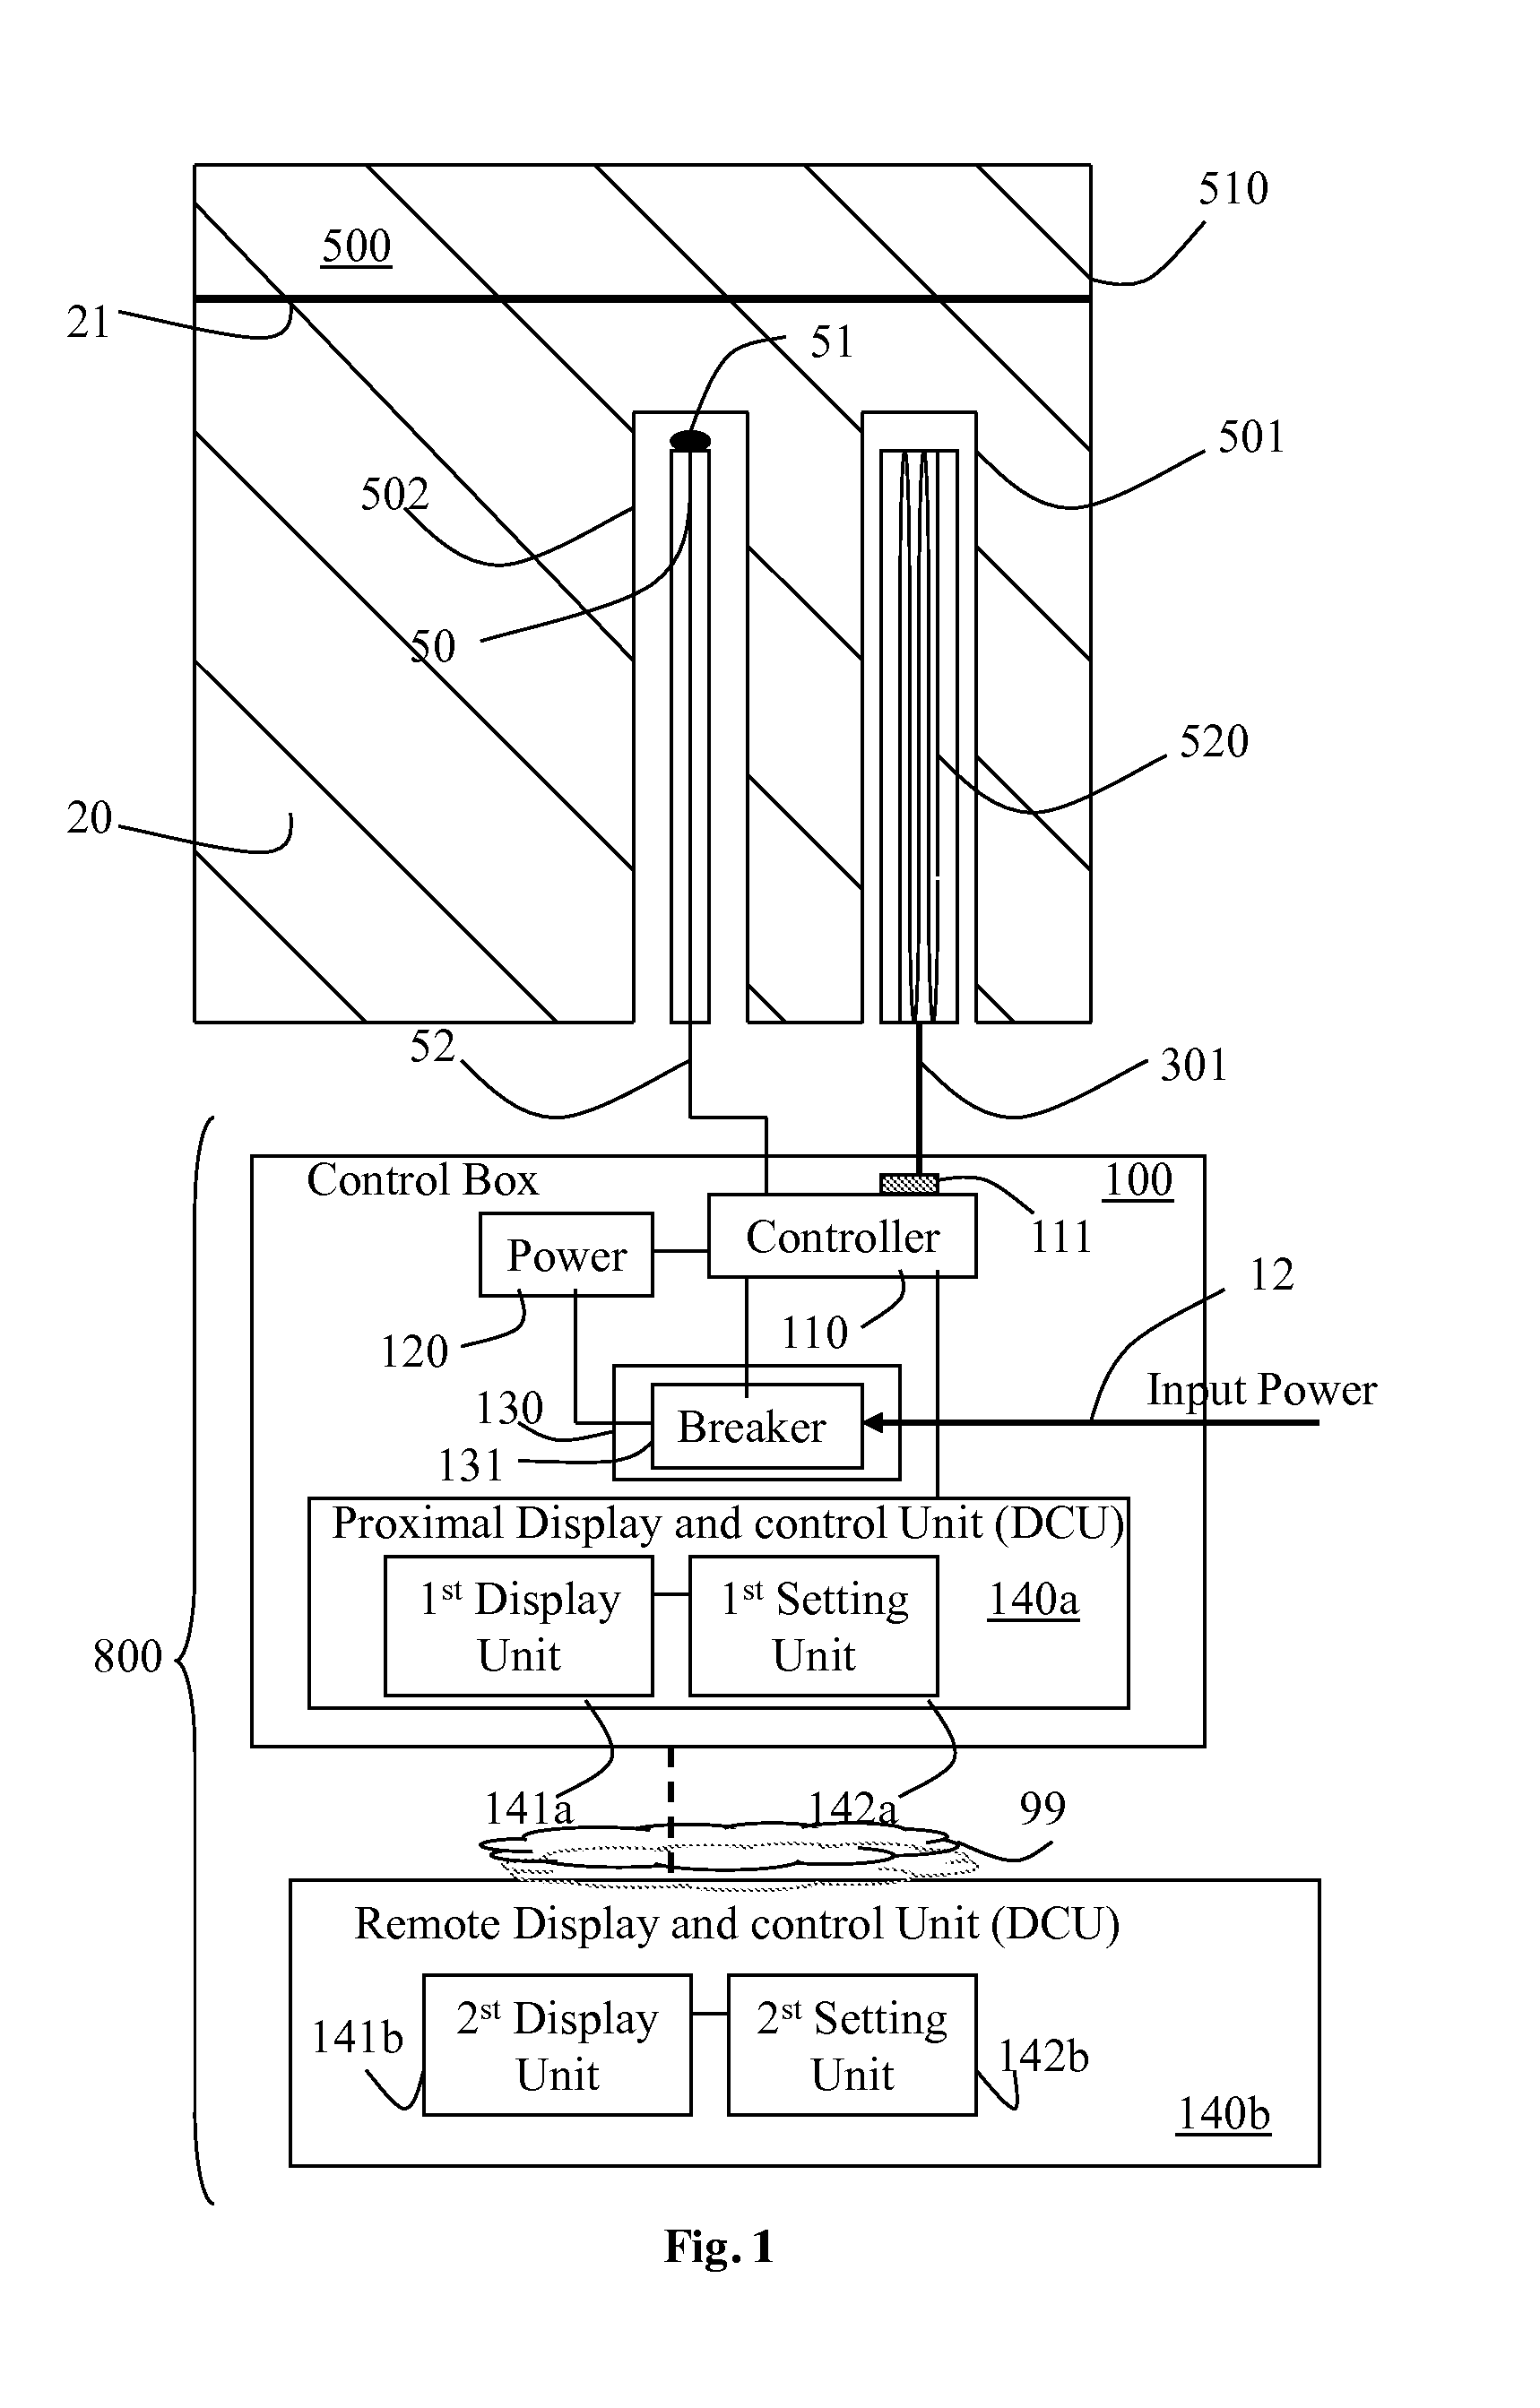 System and method for monitoring and controlling heating/cooling systems